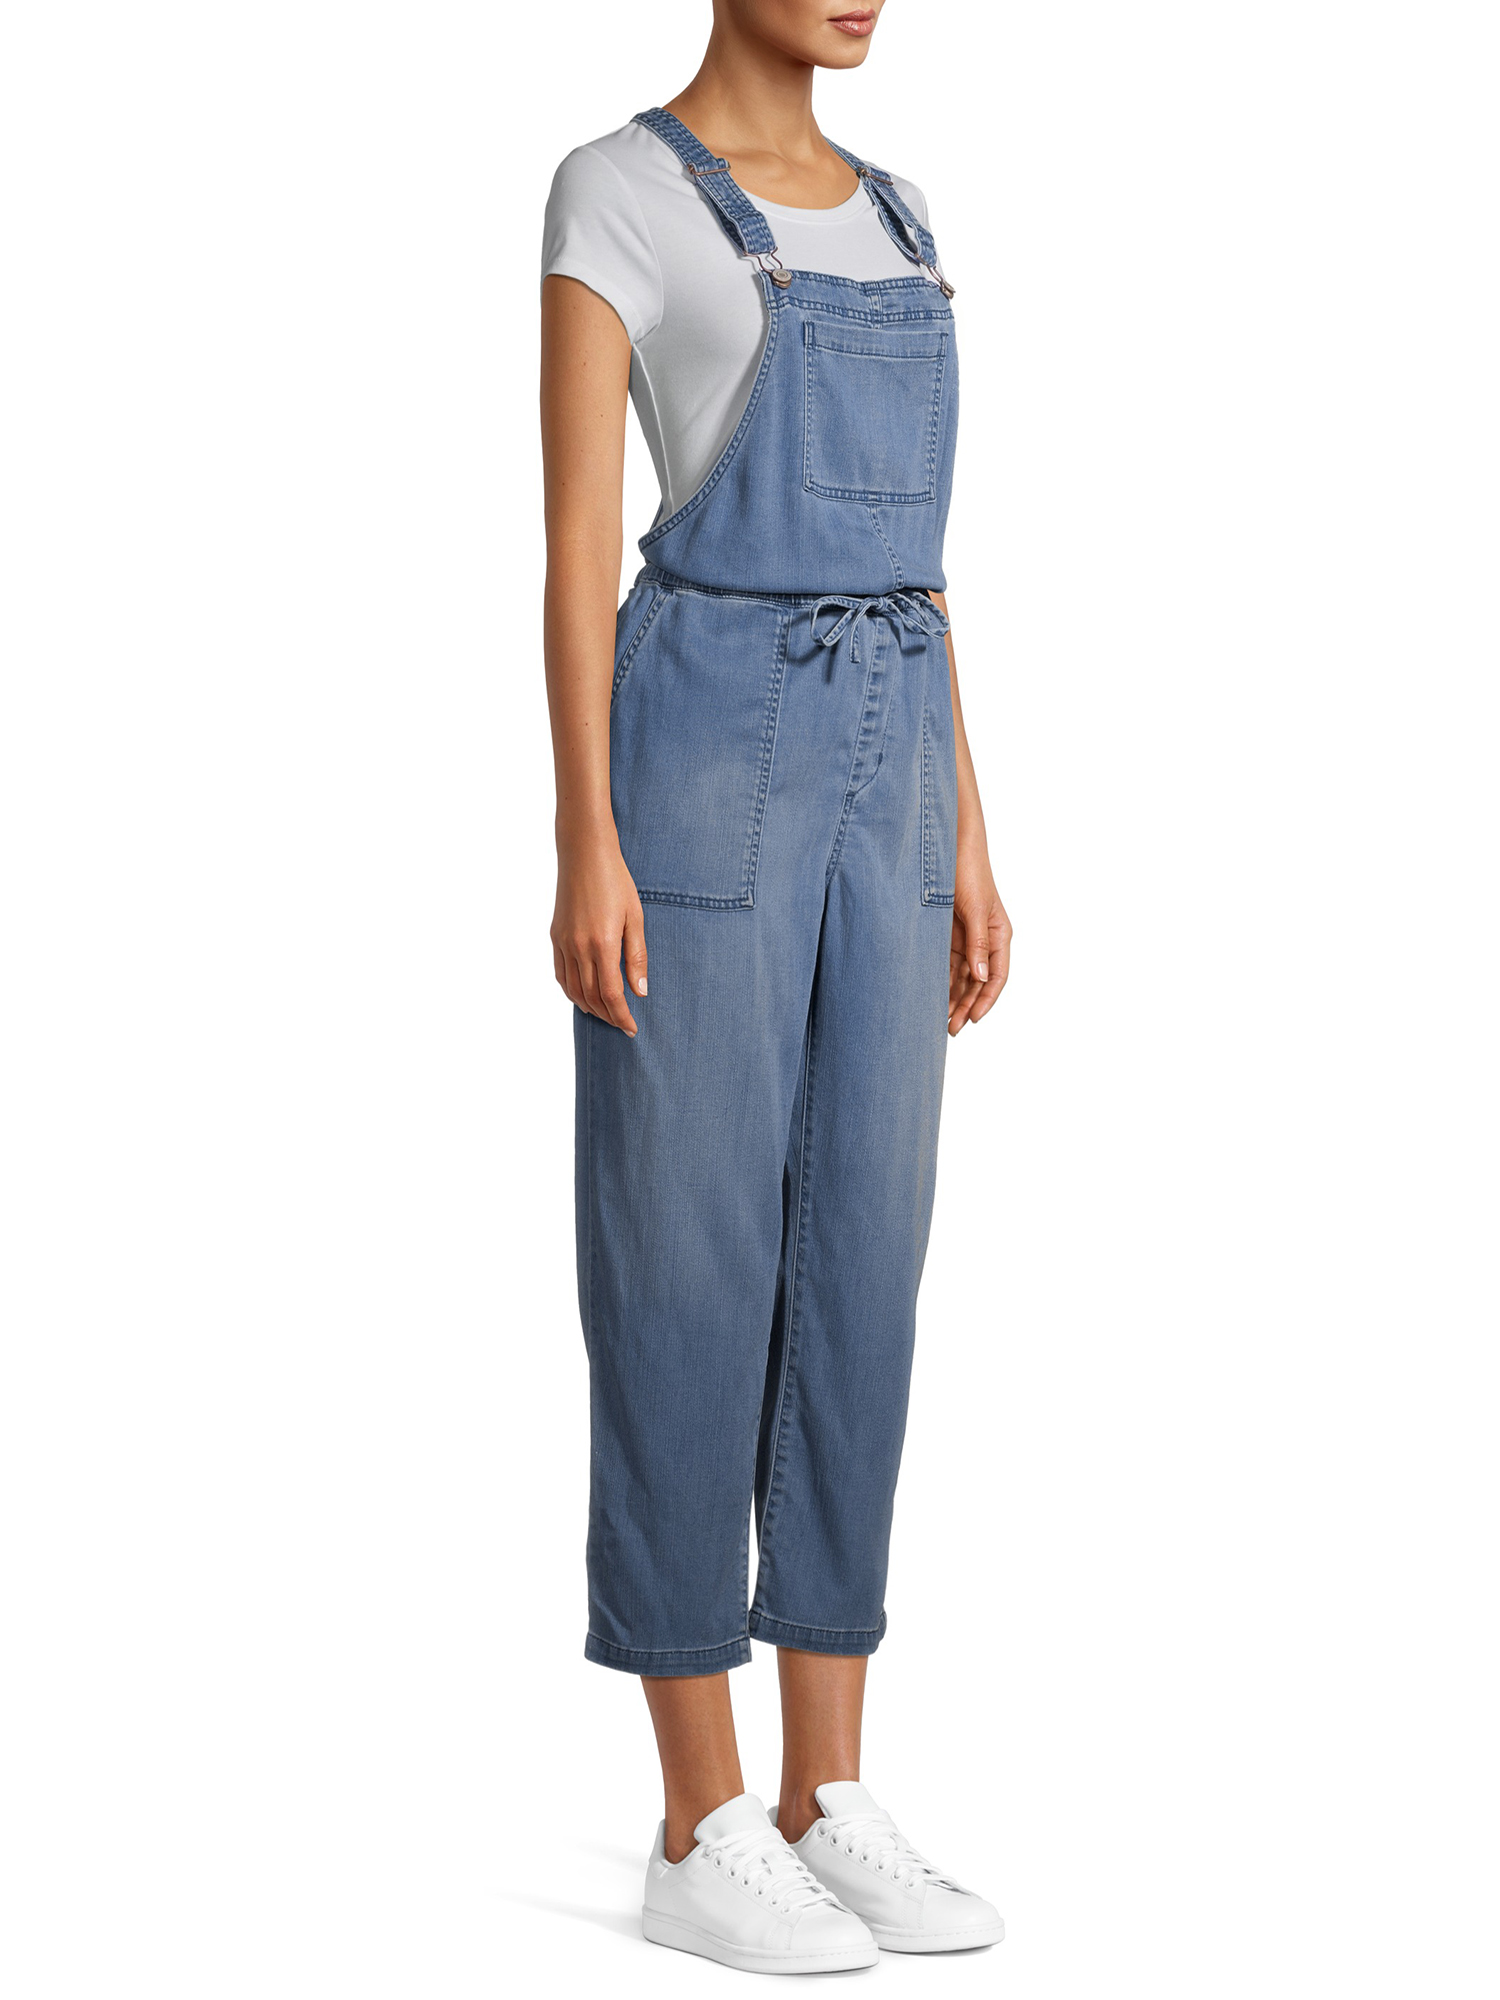 Time and Tru Women's Lightweight Soft Overalls - image 3 of 6